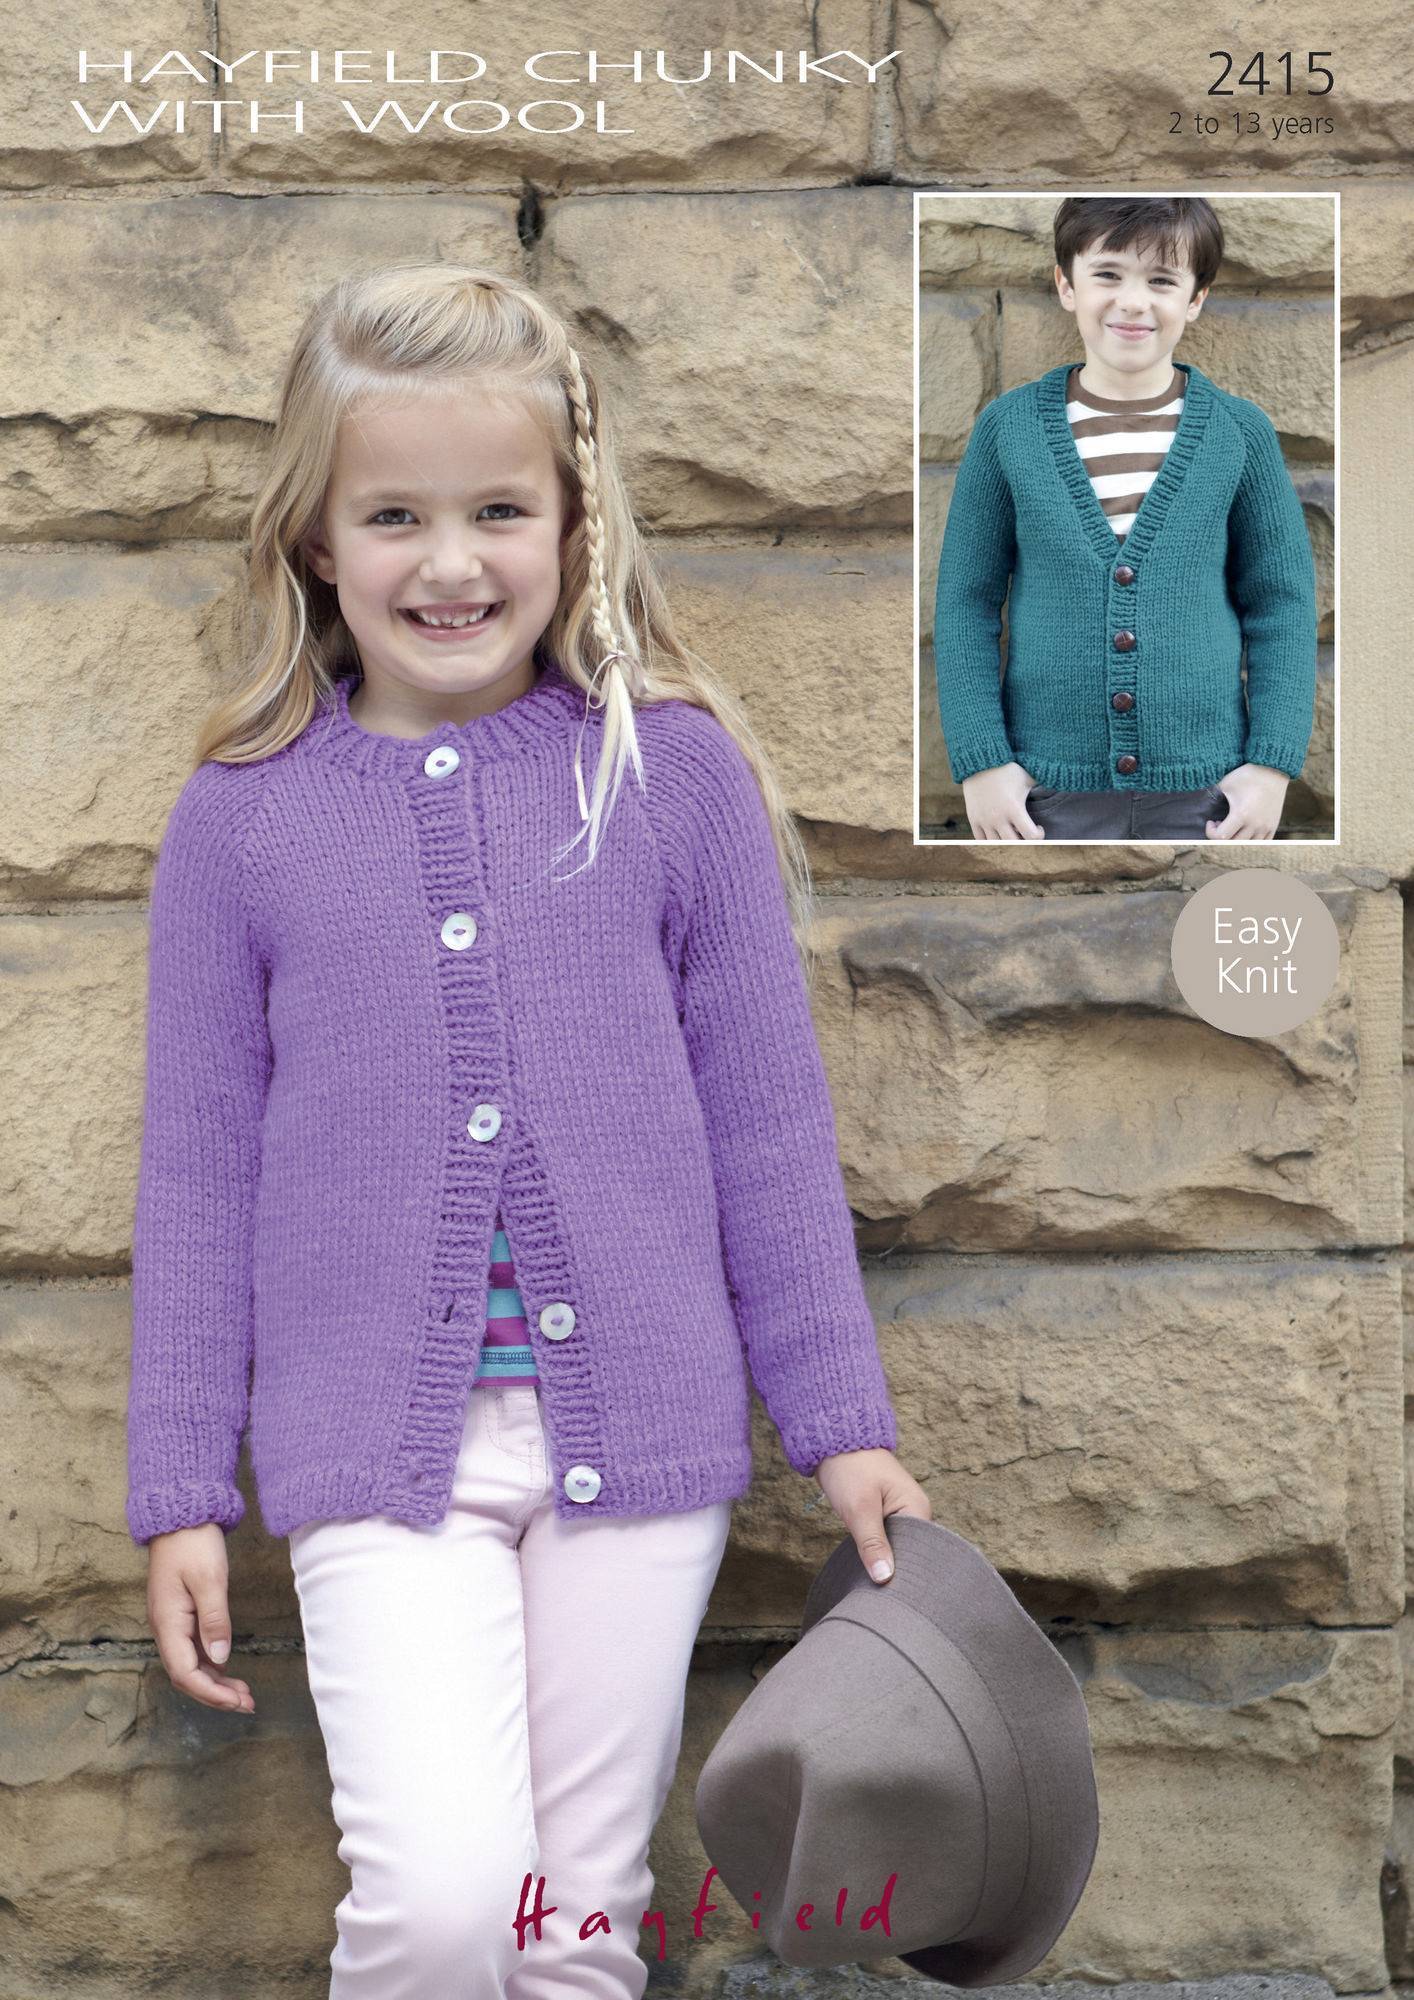 Cardigans in Hayfield Chunky with Wool (2415) | The Knitting Network